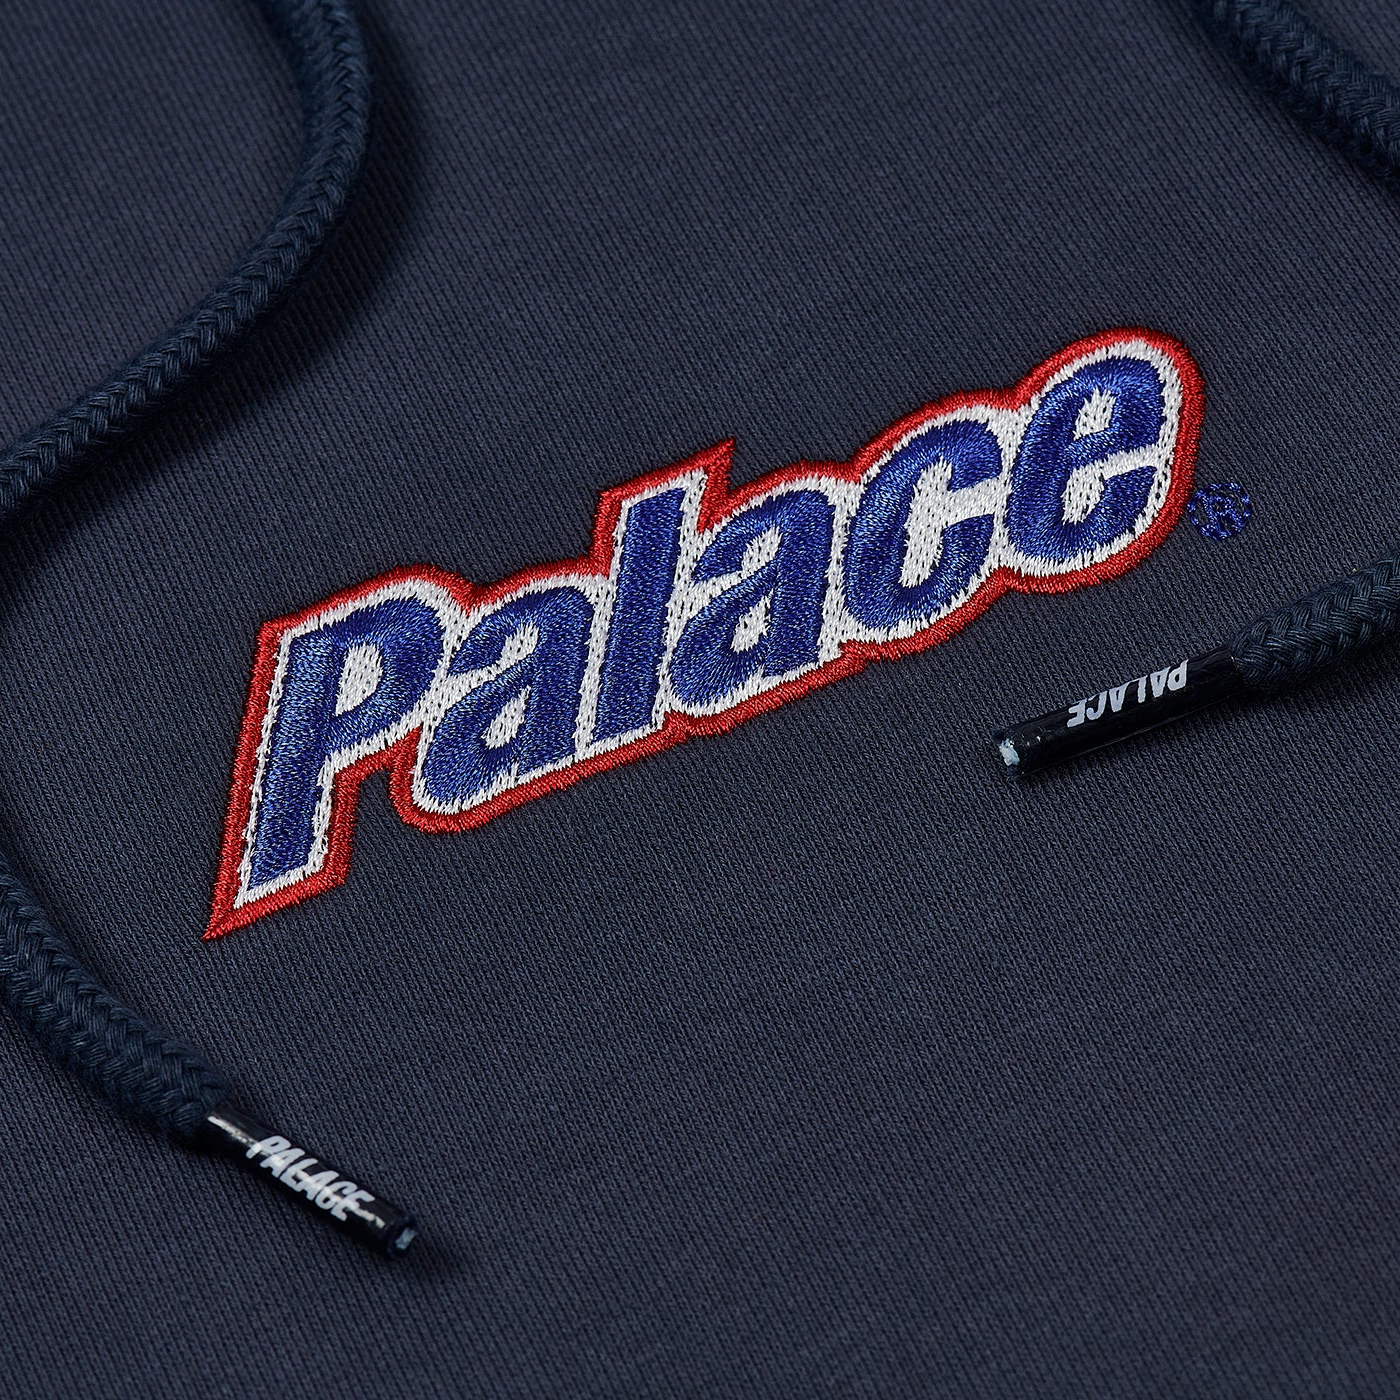 Thumbnail CURRENT HOOD NAVY one color